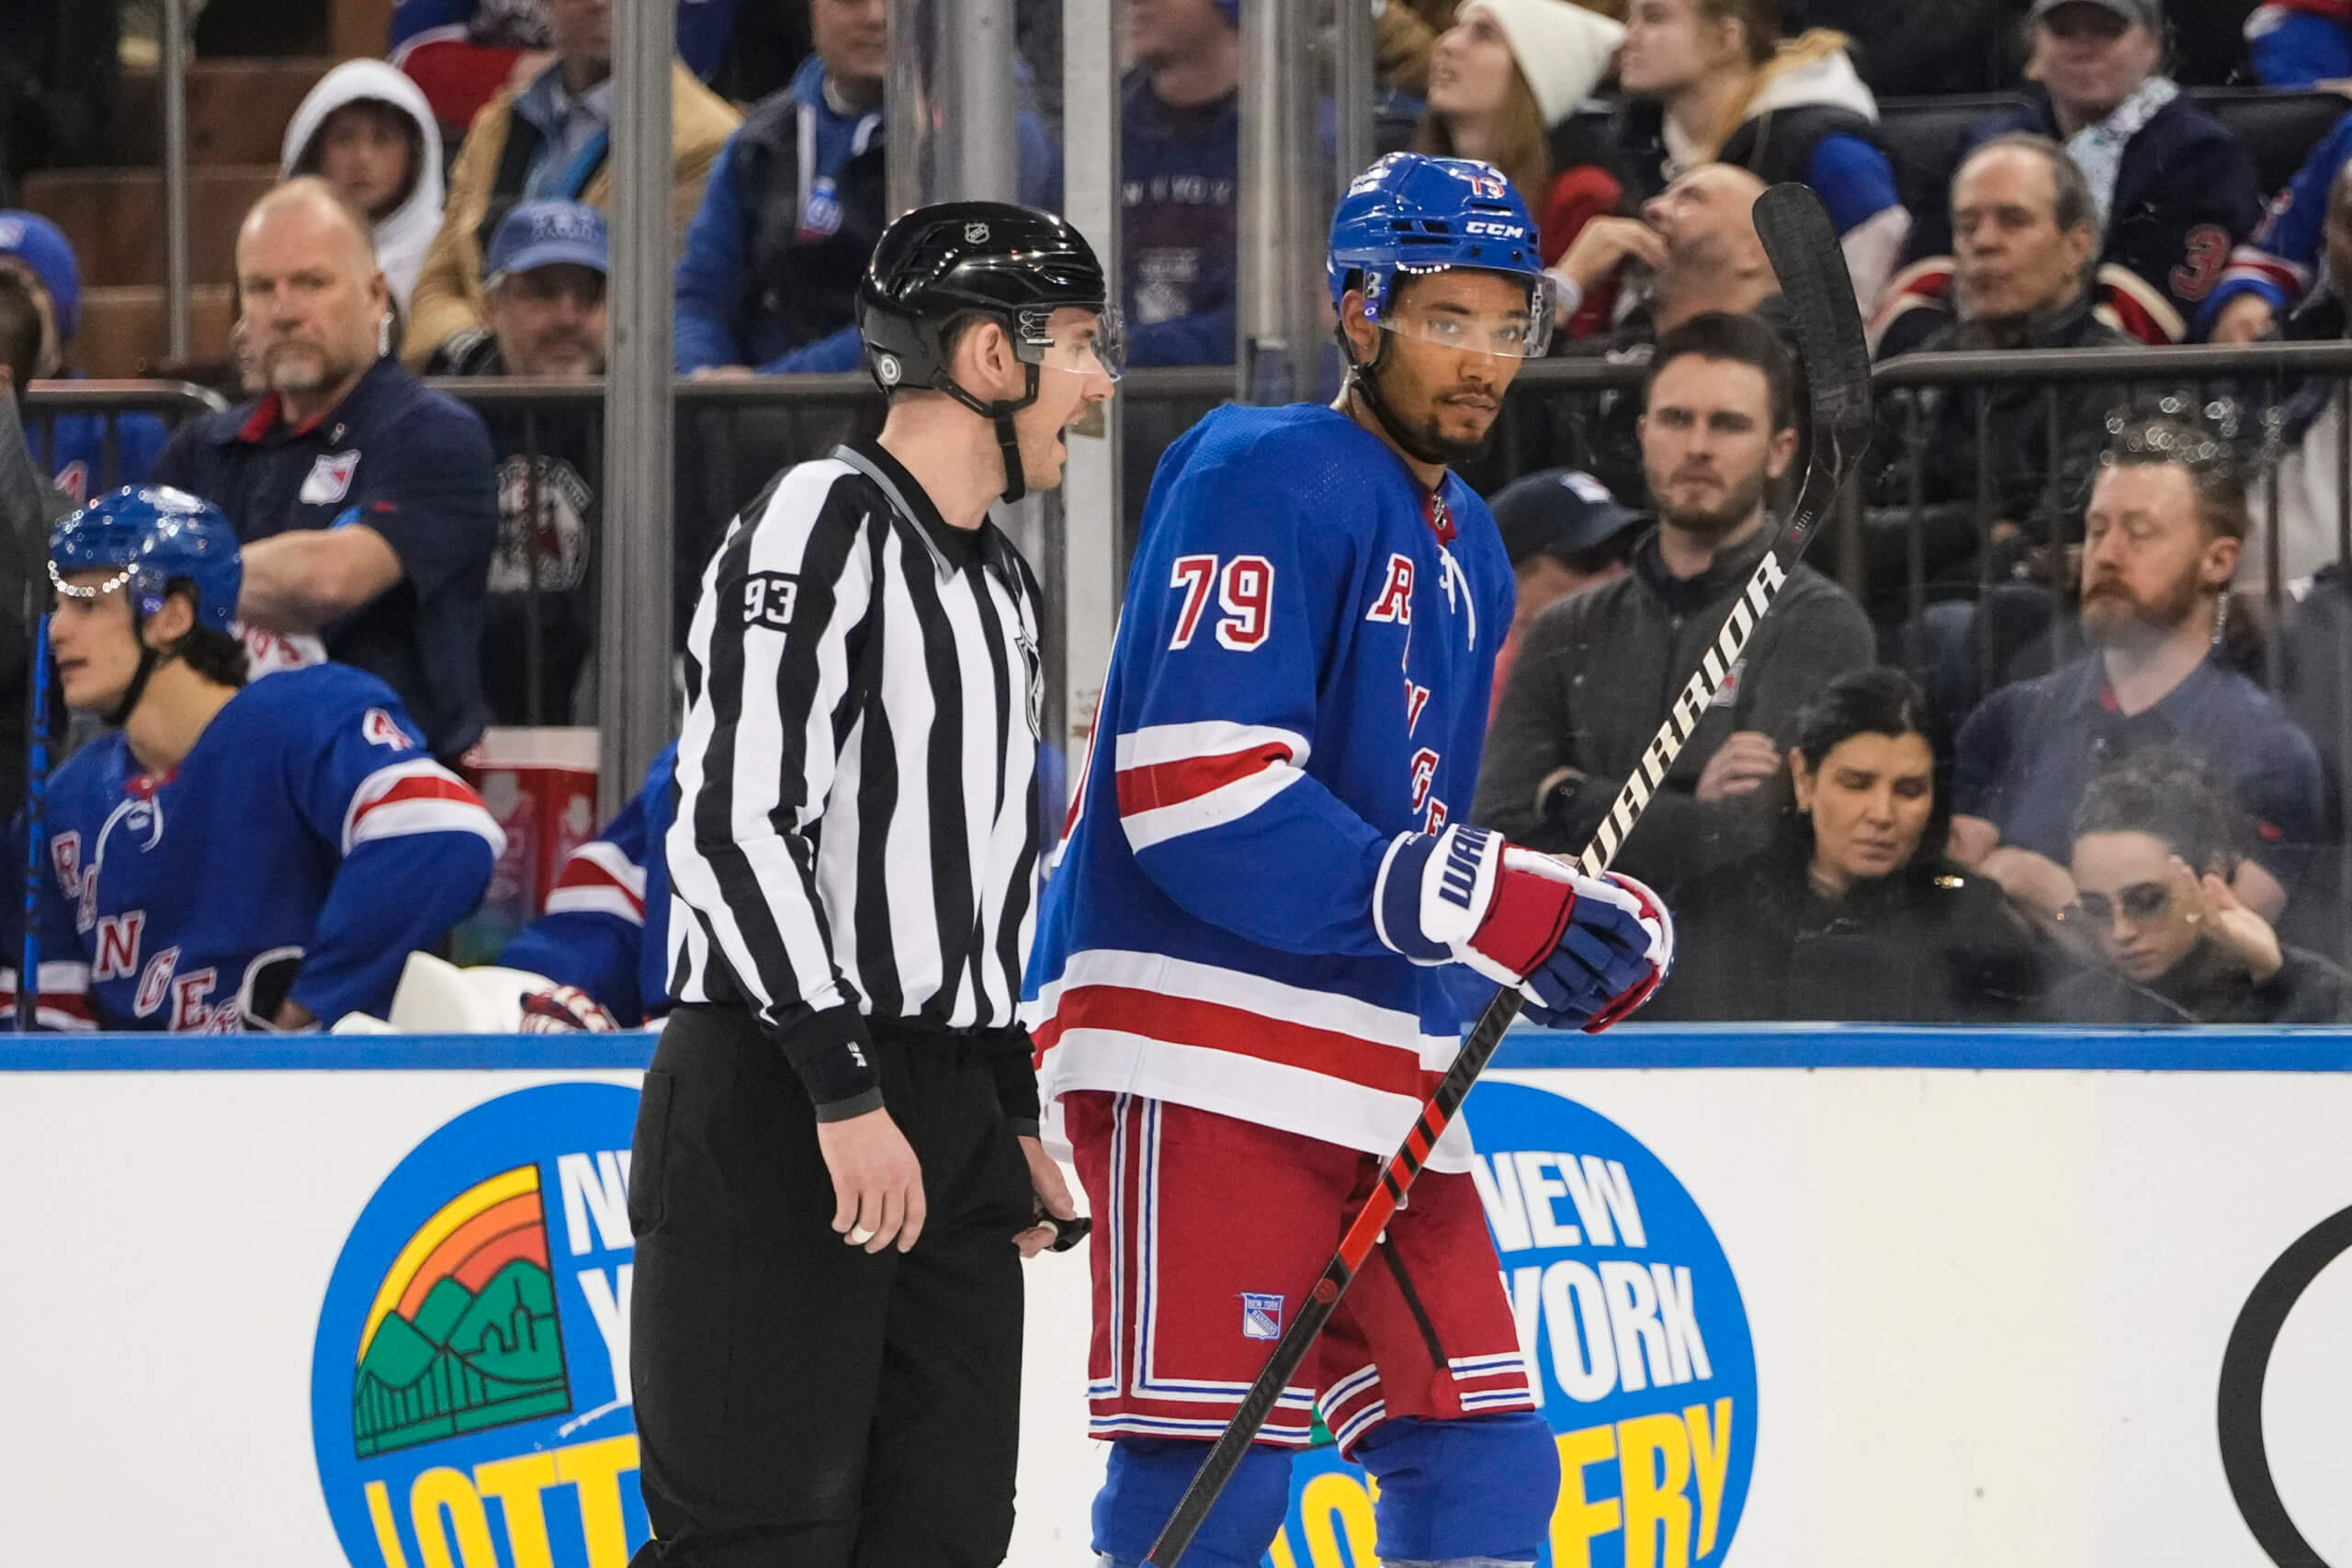 A Gay Referee Tries to Find His Place in Hockey - The New York Times